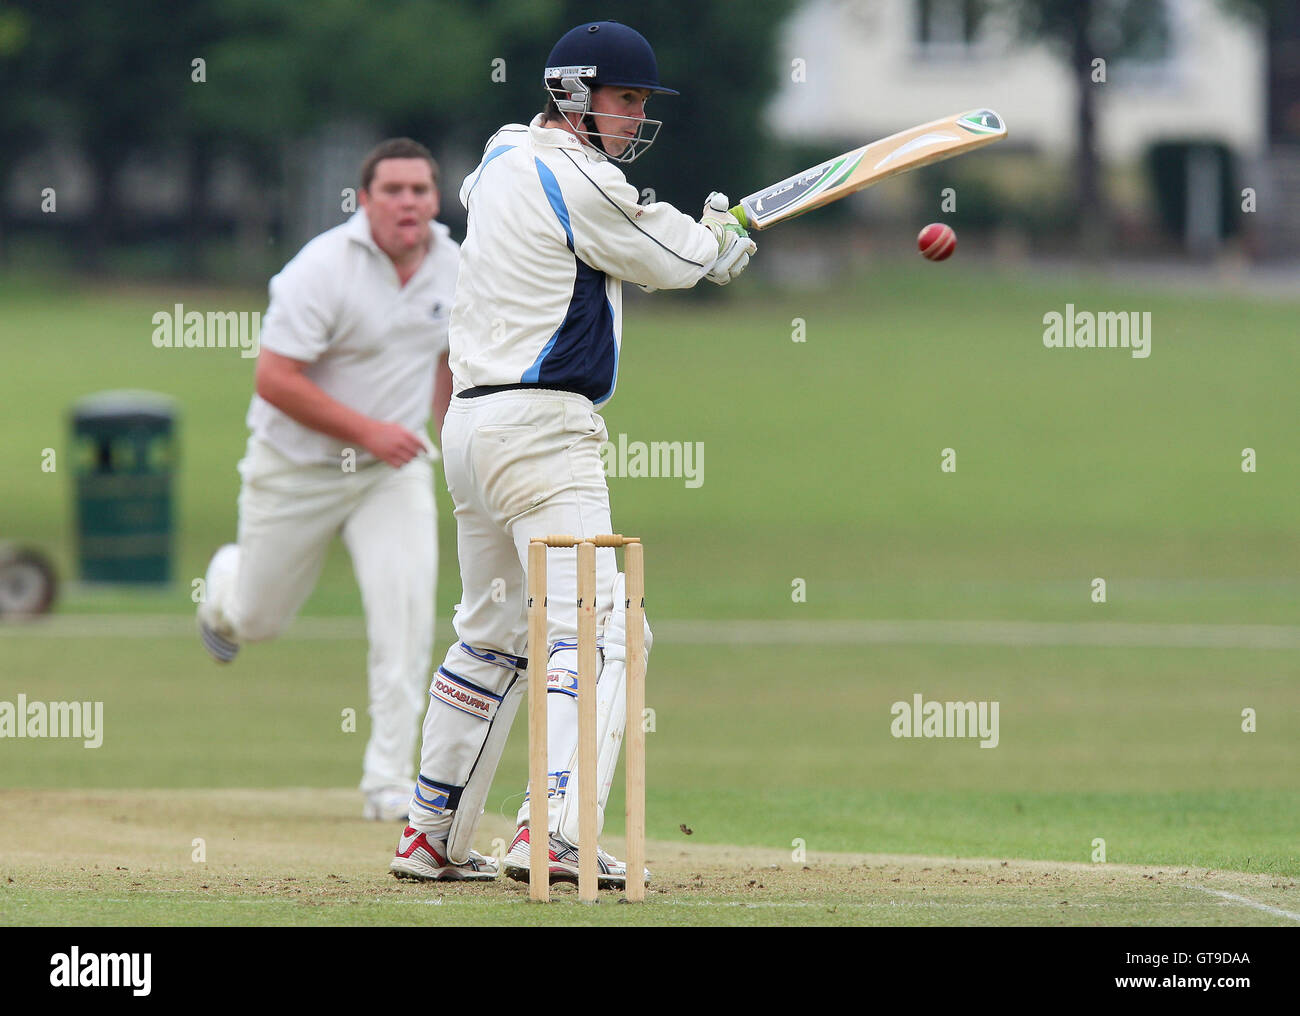 Alan Ison of Upminster bowls to Robert Marshall - Upminster CC vs Woodford Wells CC - Essex Cricket League - 06/06/09. Stock Photo